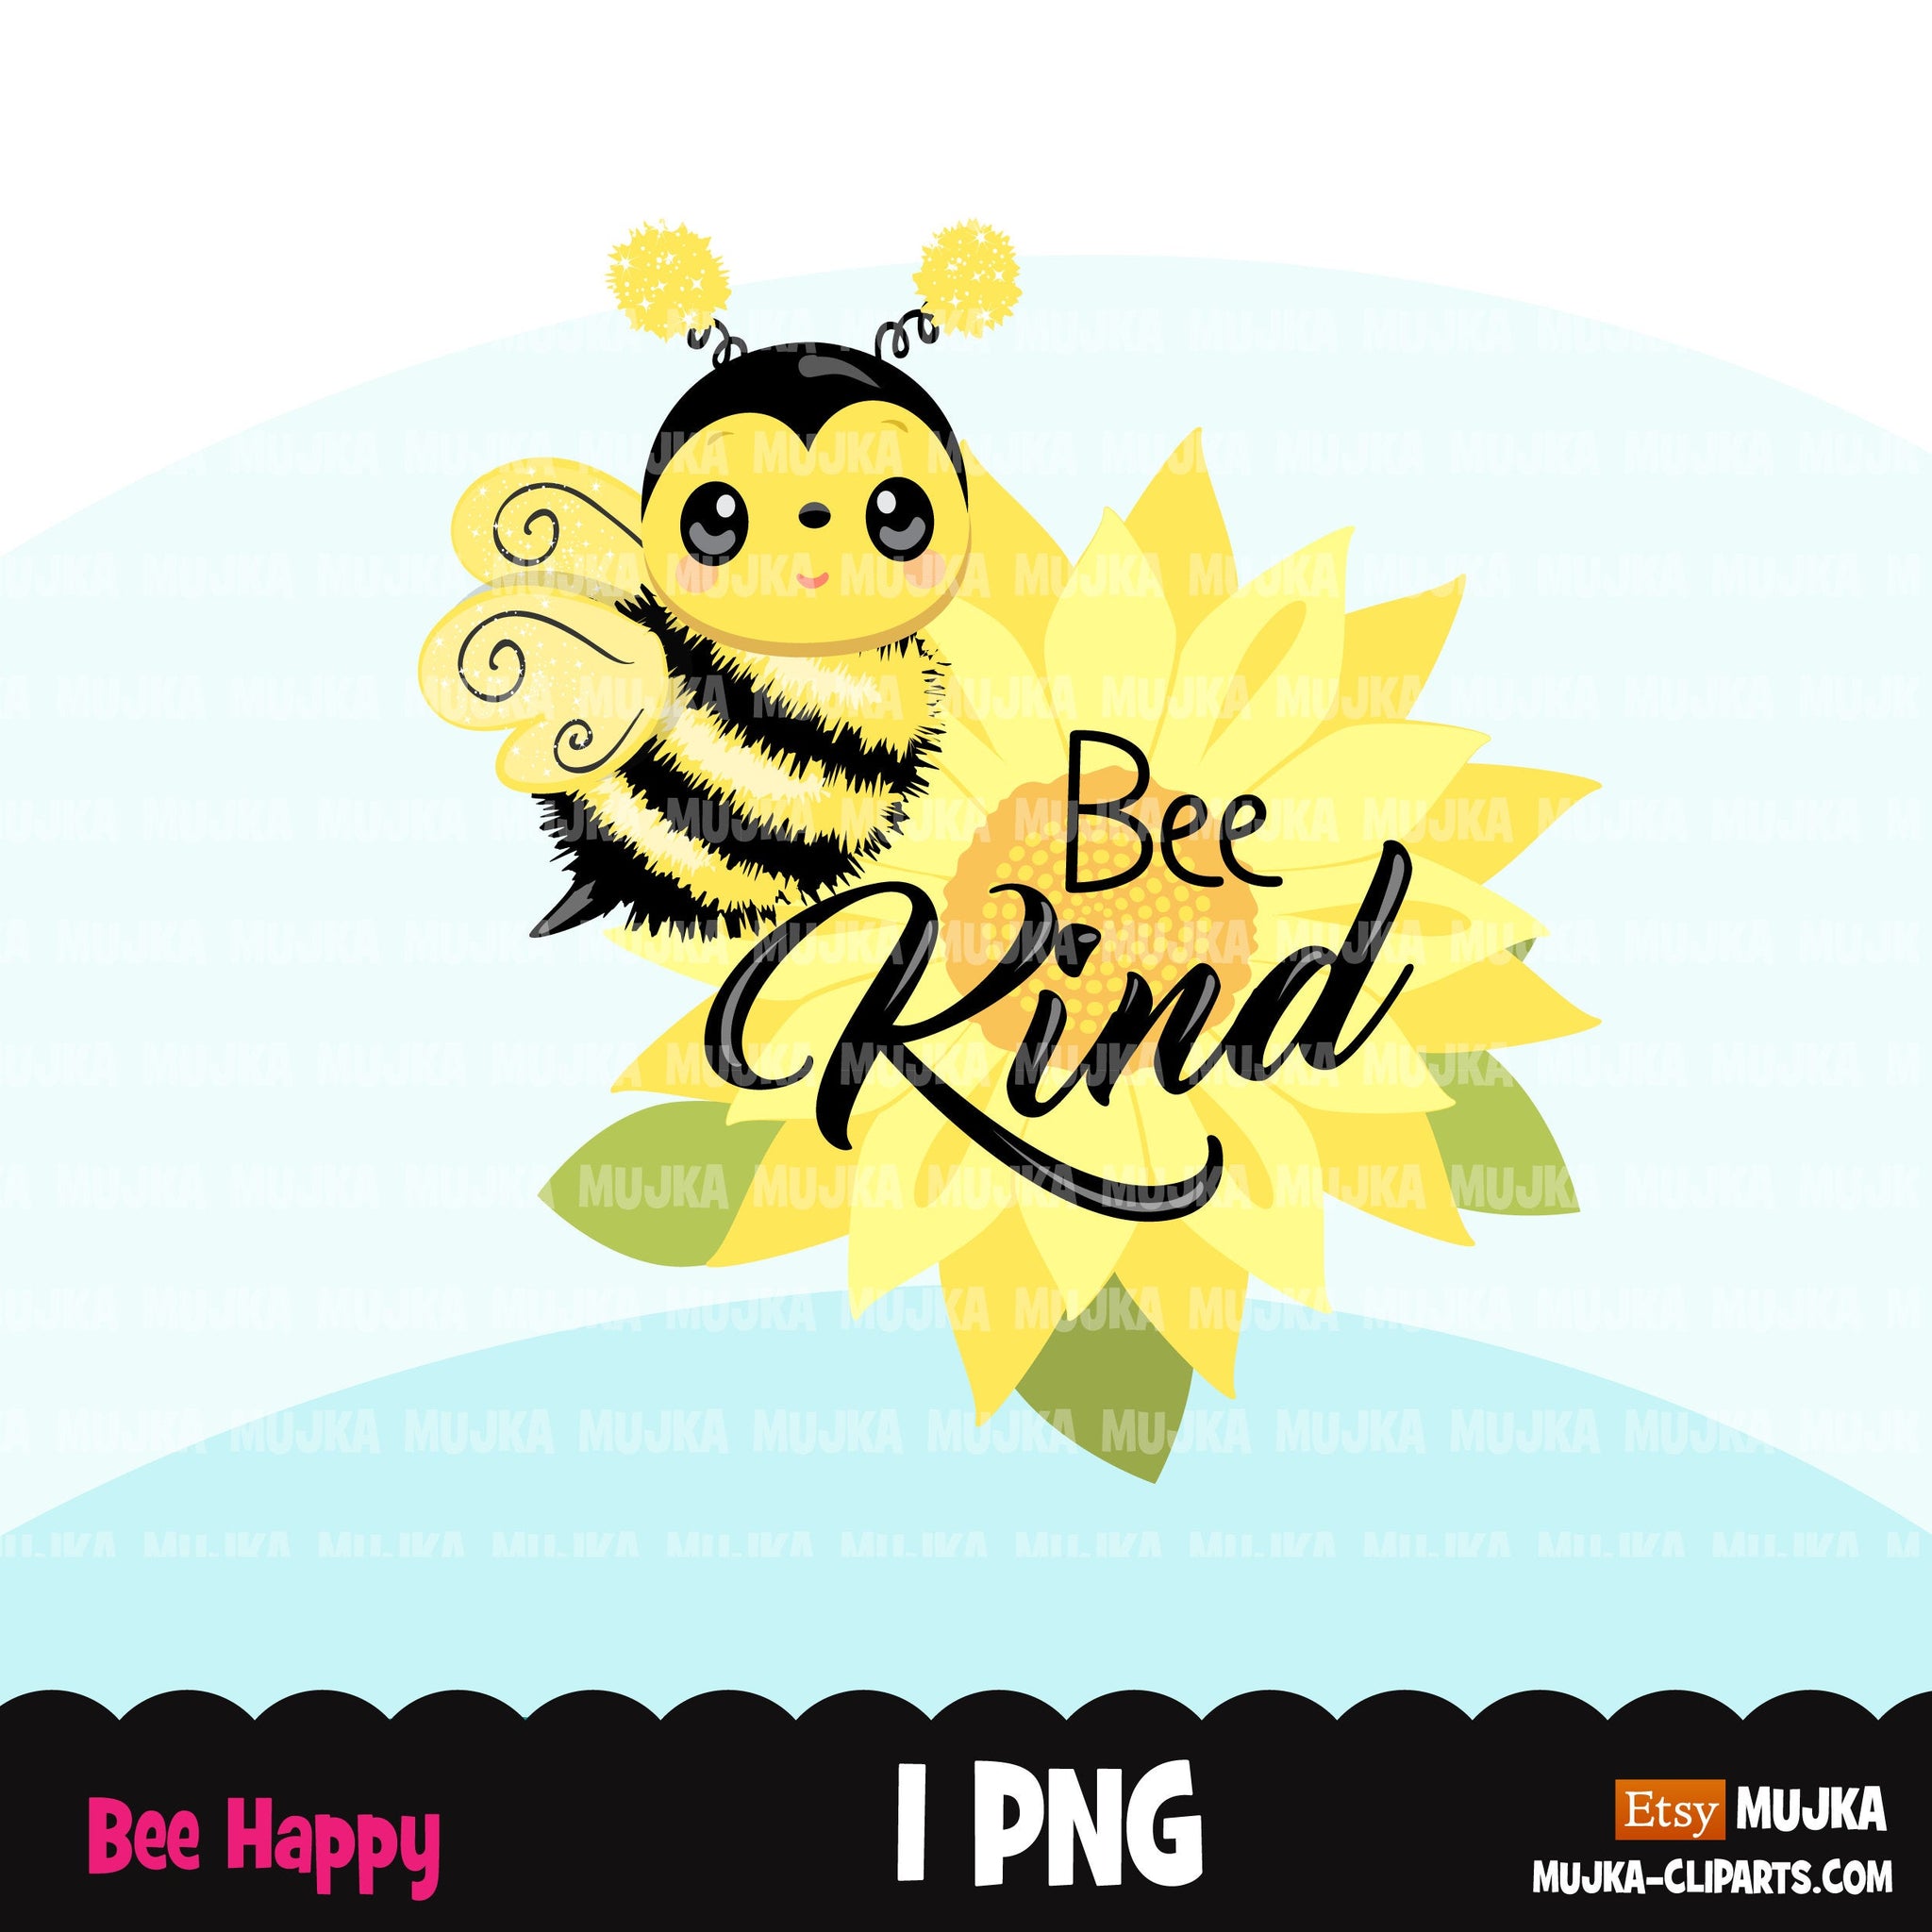 Bee Kind clipart, Bee kind sublimation designs digital download, Easter spring shirt, Bee Shirt Png, PNG files for cricut downloads